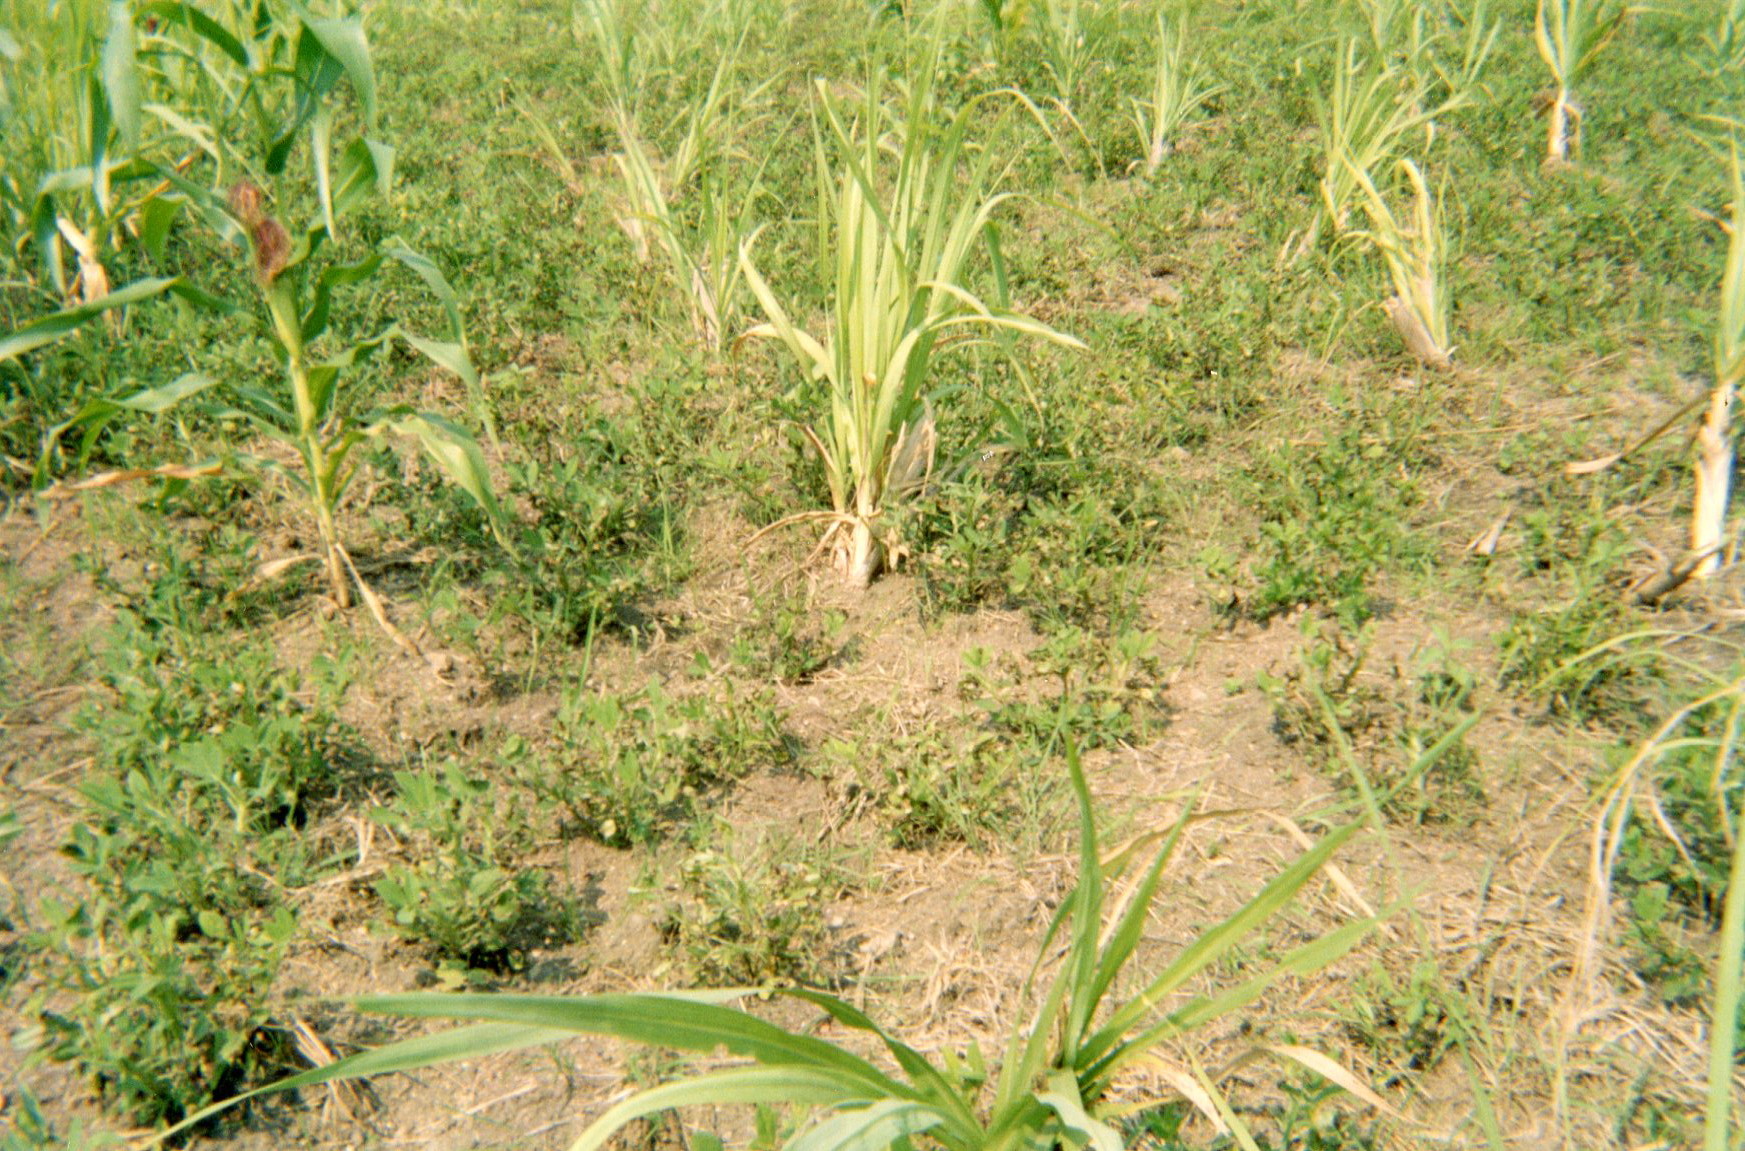  This picture shows my field of corn and peanuts. It can be considered my income generating activity.&nbsp; 